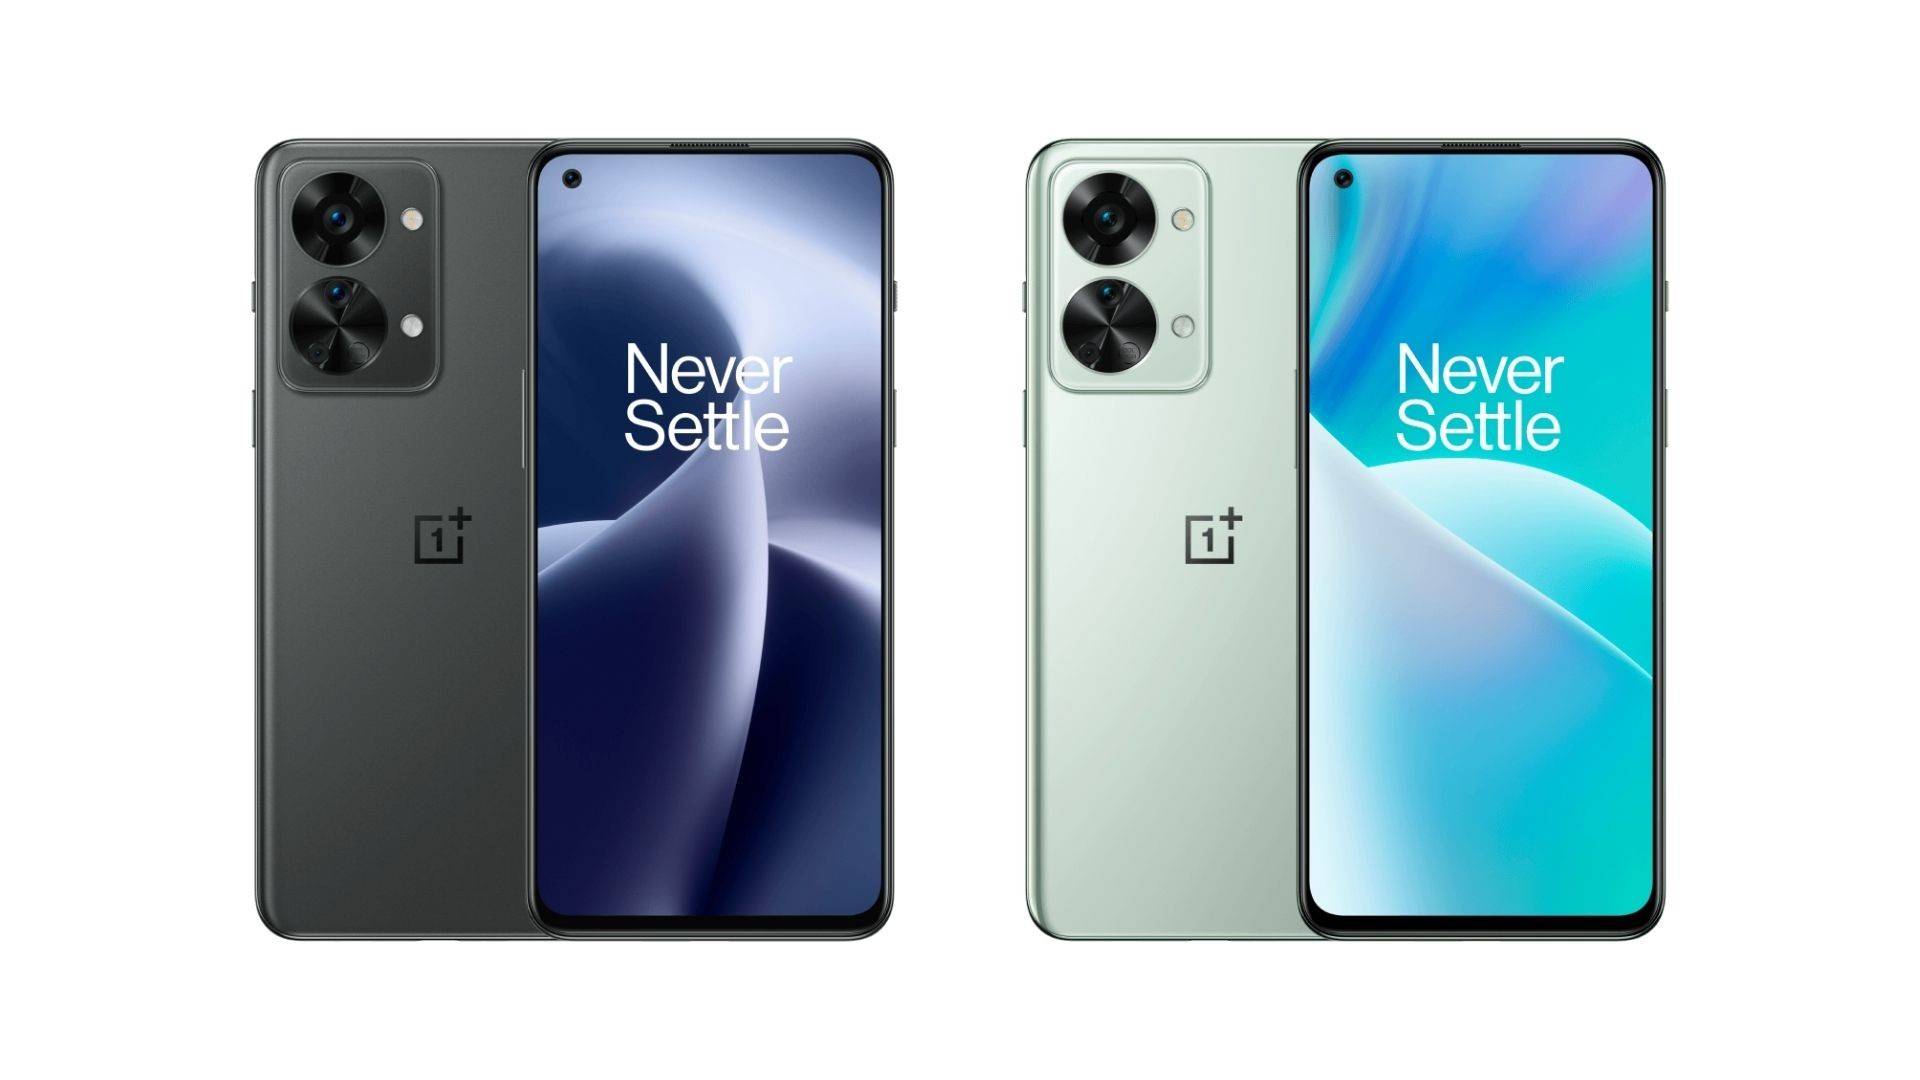 OnePlus Nord 2T 5G colors options: Gray Shadow (Black) and Jade Fog (Green)